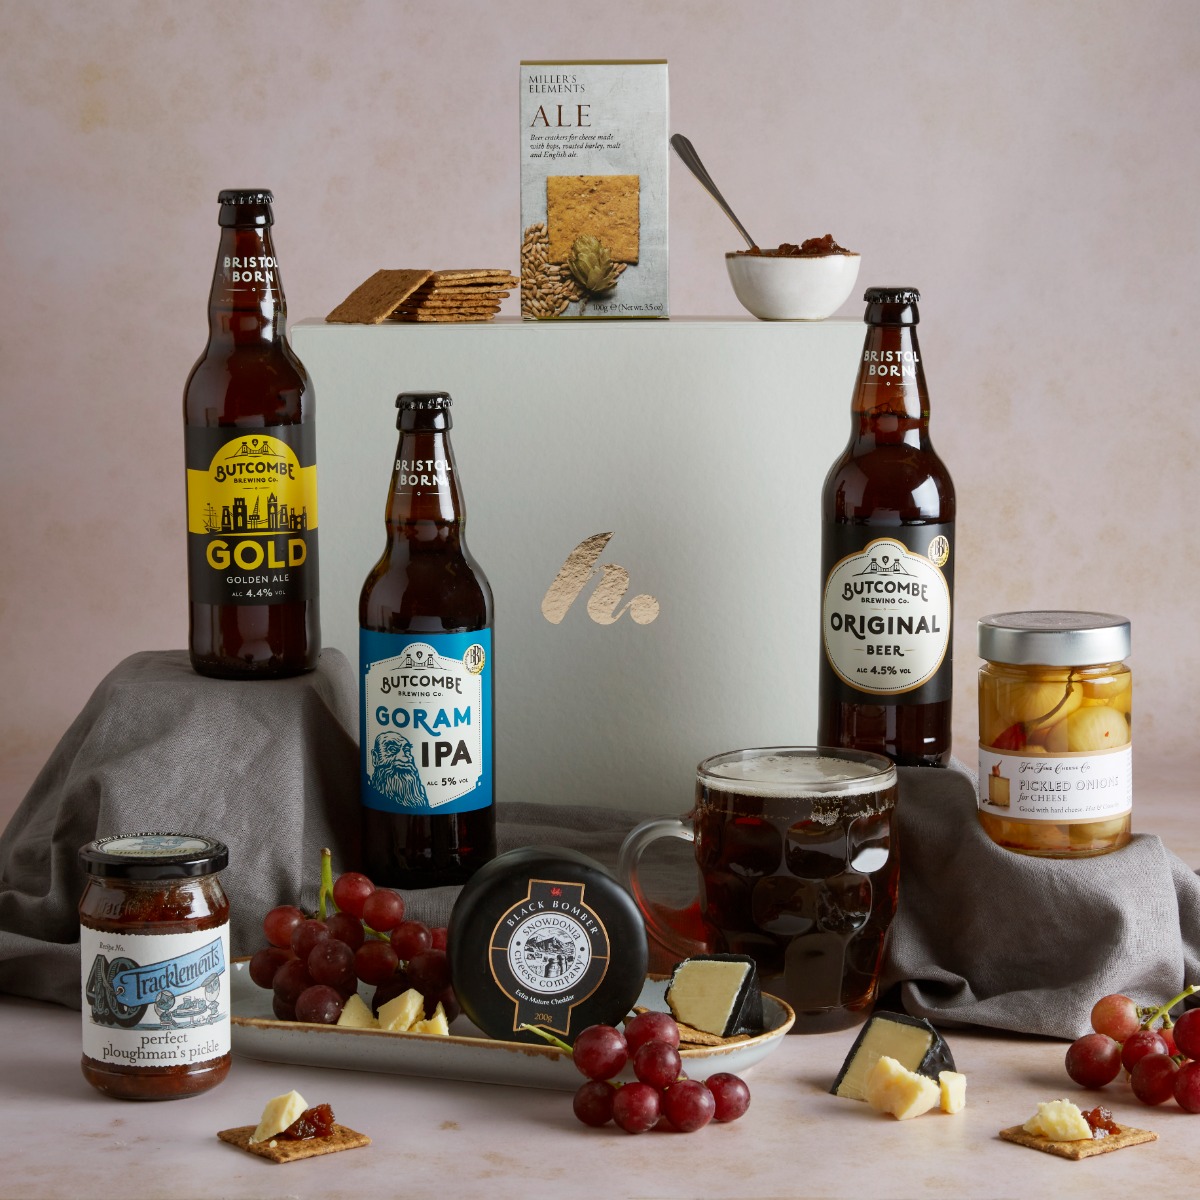 Ploughman's Beer & Cheese Hamper with contents on display, including real ales